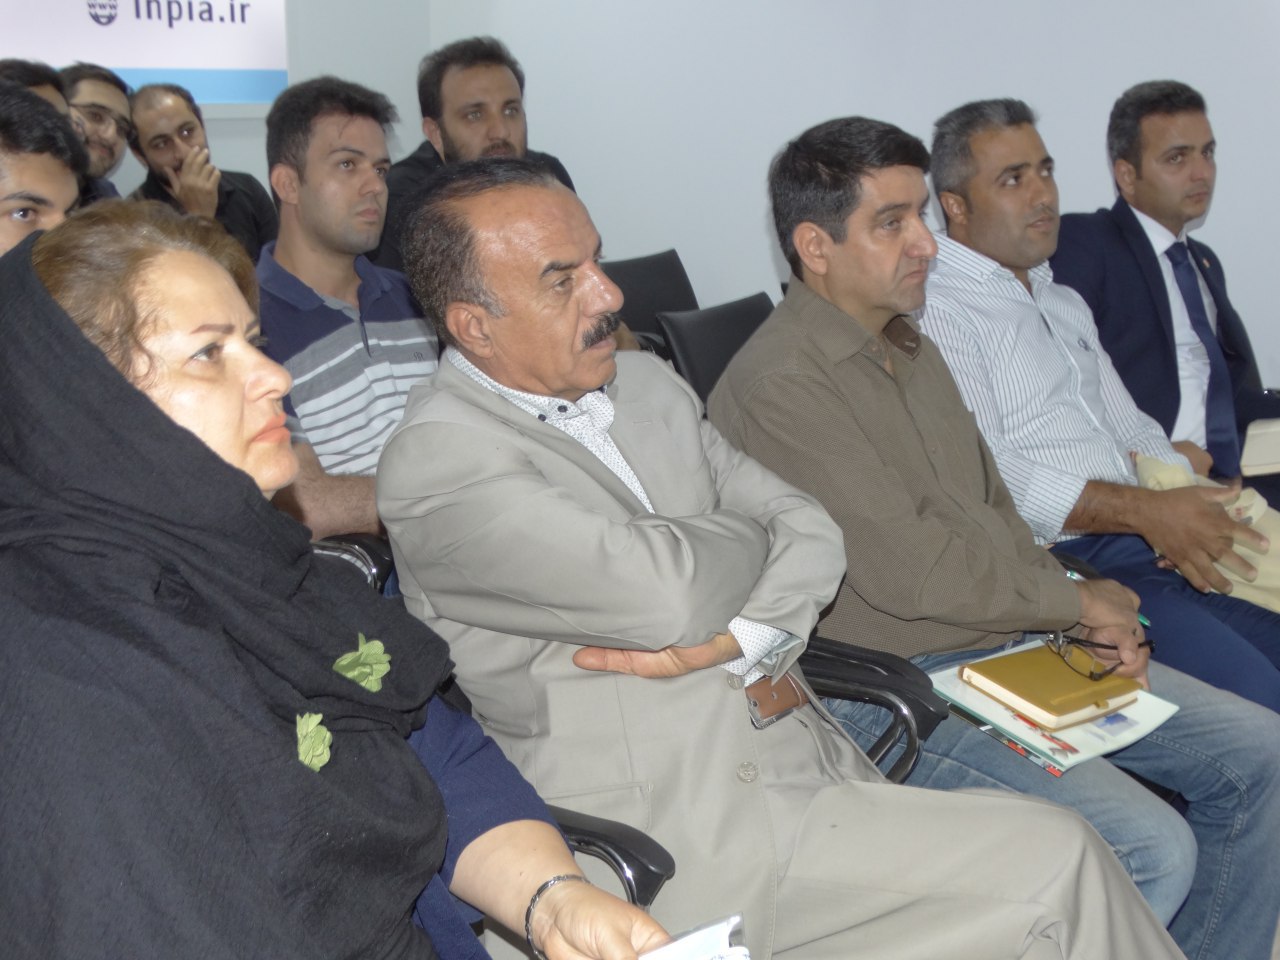 Image Gallery of National Association training courses in Iran Plast 98